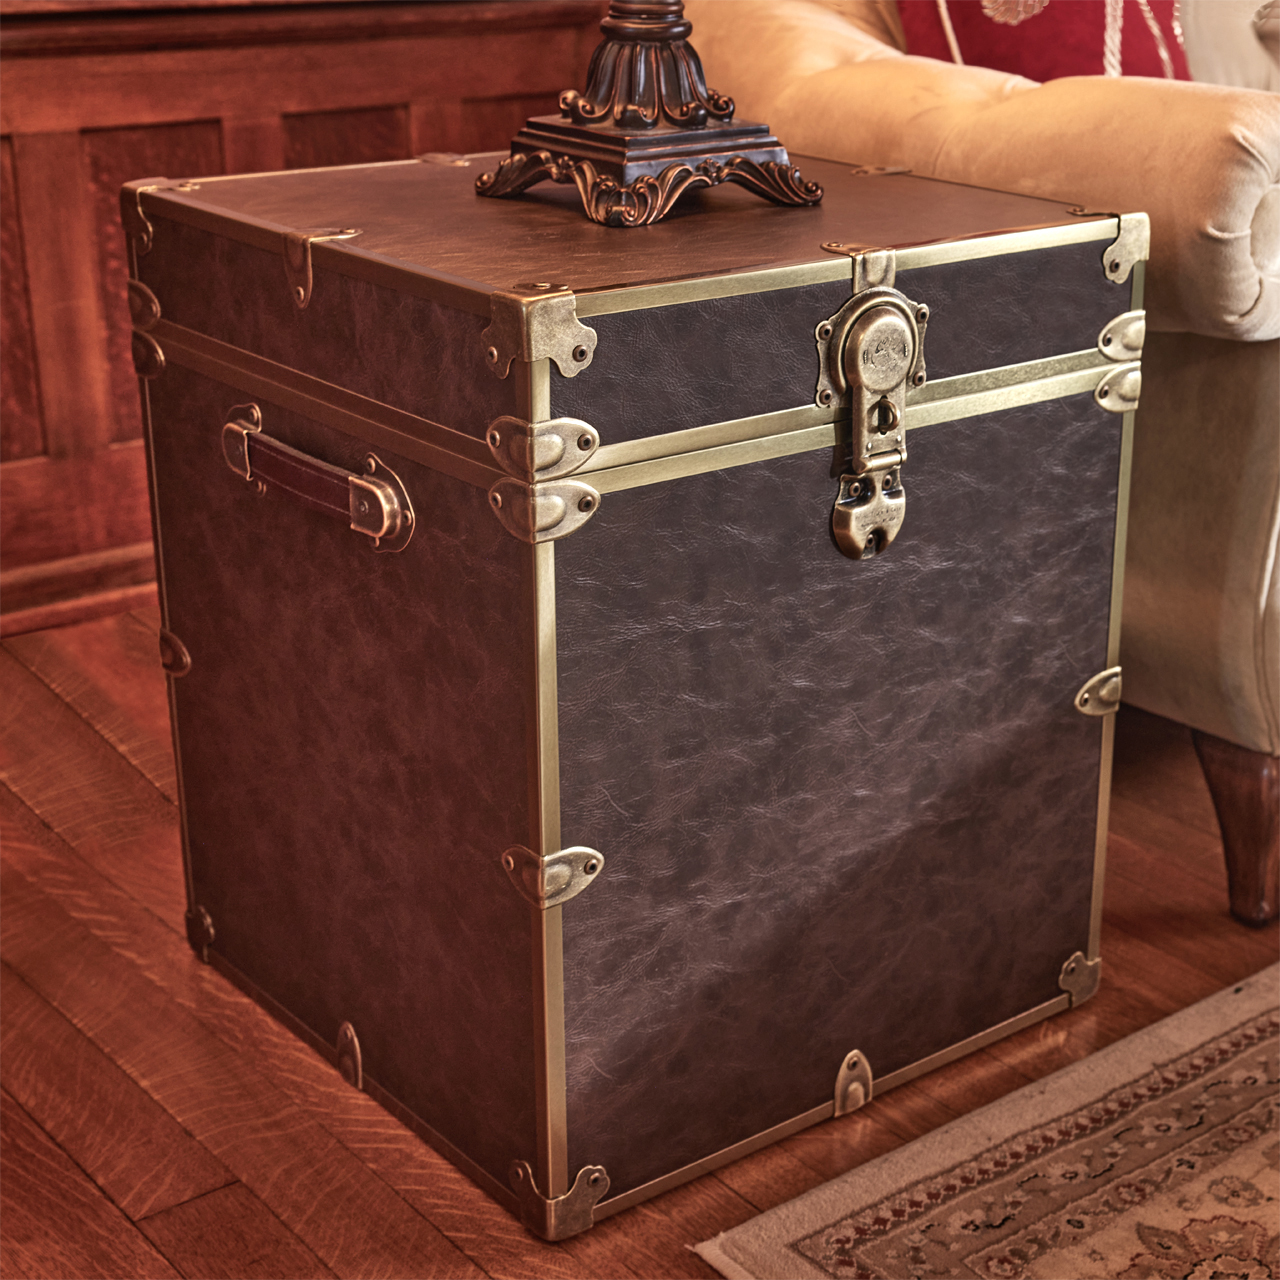 Rhino Luxury Faux Leather End Table Trunk with Feet